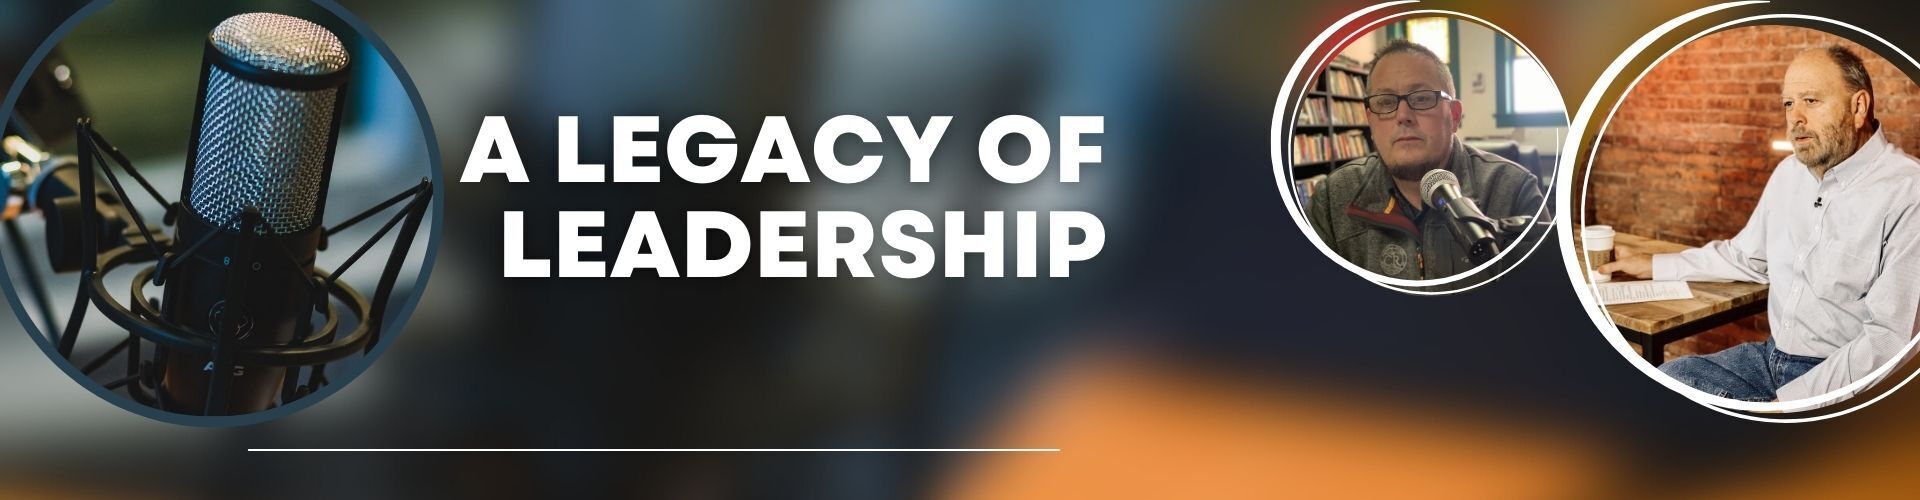 A Legacy of Leadership: Tribute Cast